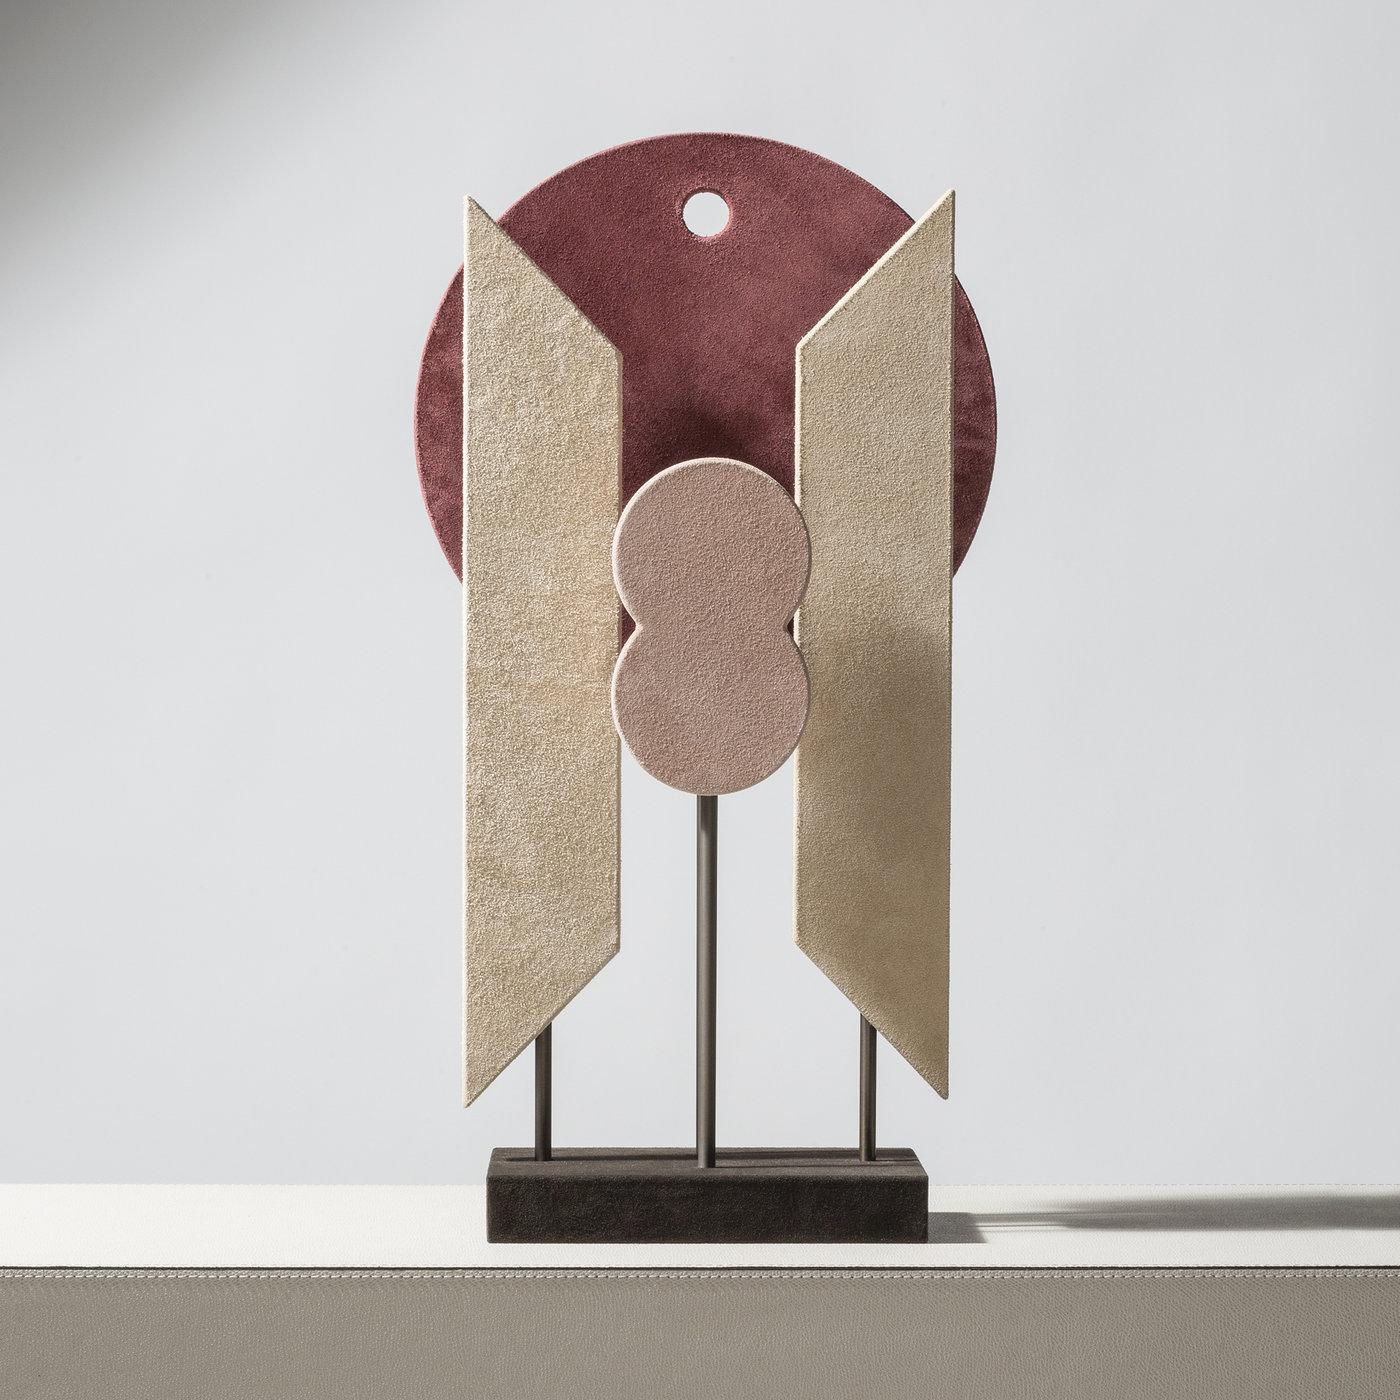 Contemporary leather sculpture - Tabou 2 by Stephane Parmentier for Giobagnara.

A mix of space-age design and tribal art, these contemporary totems are great decorative pieces able to create a connection between abstraction and